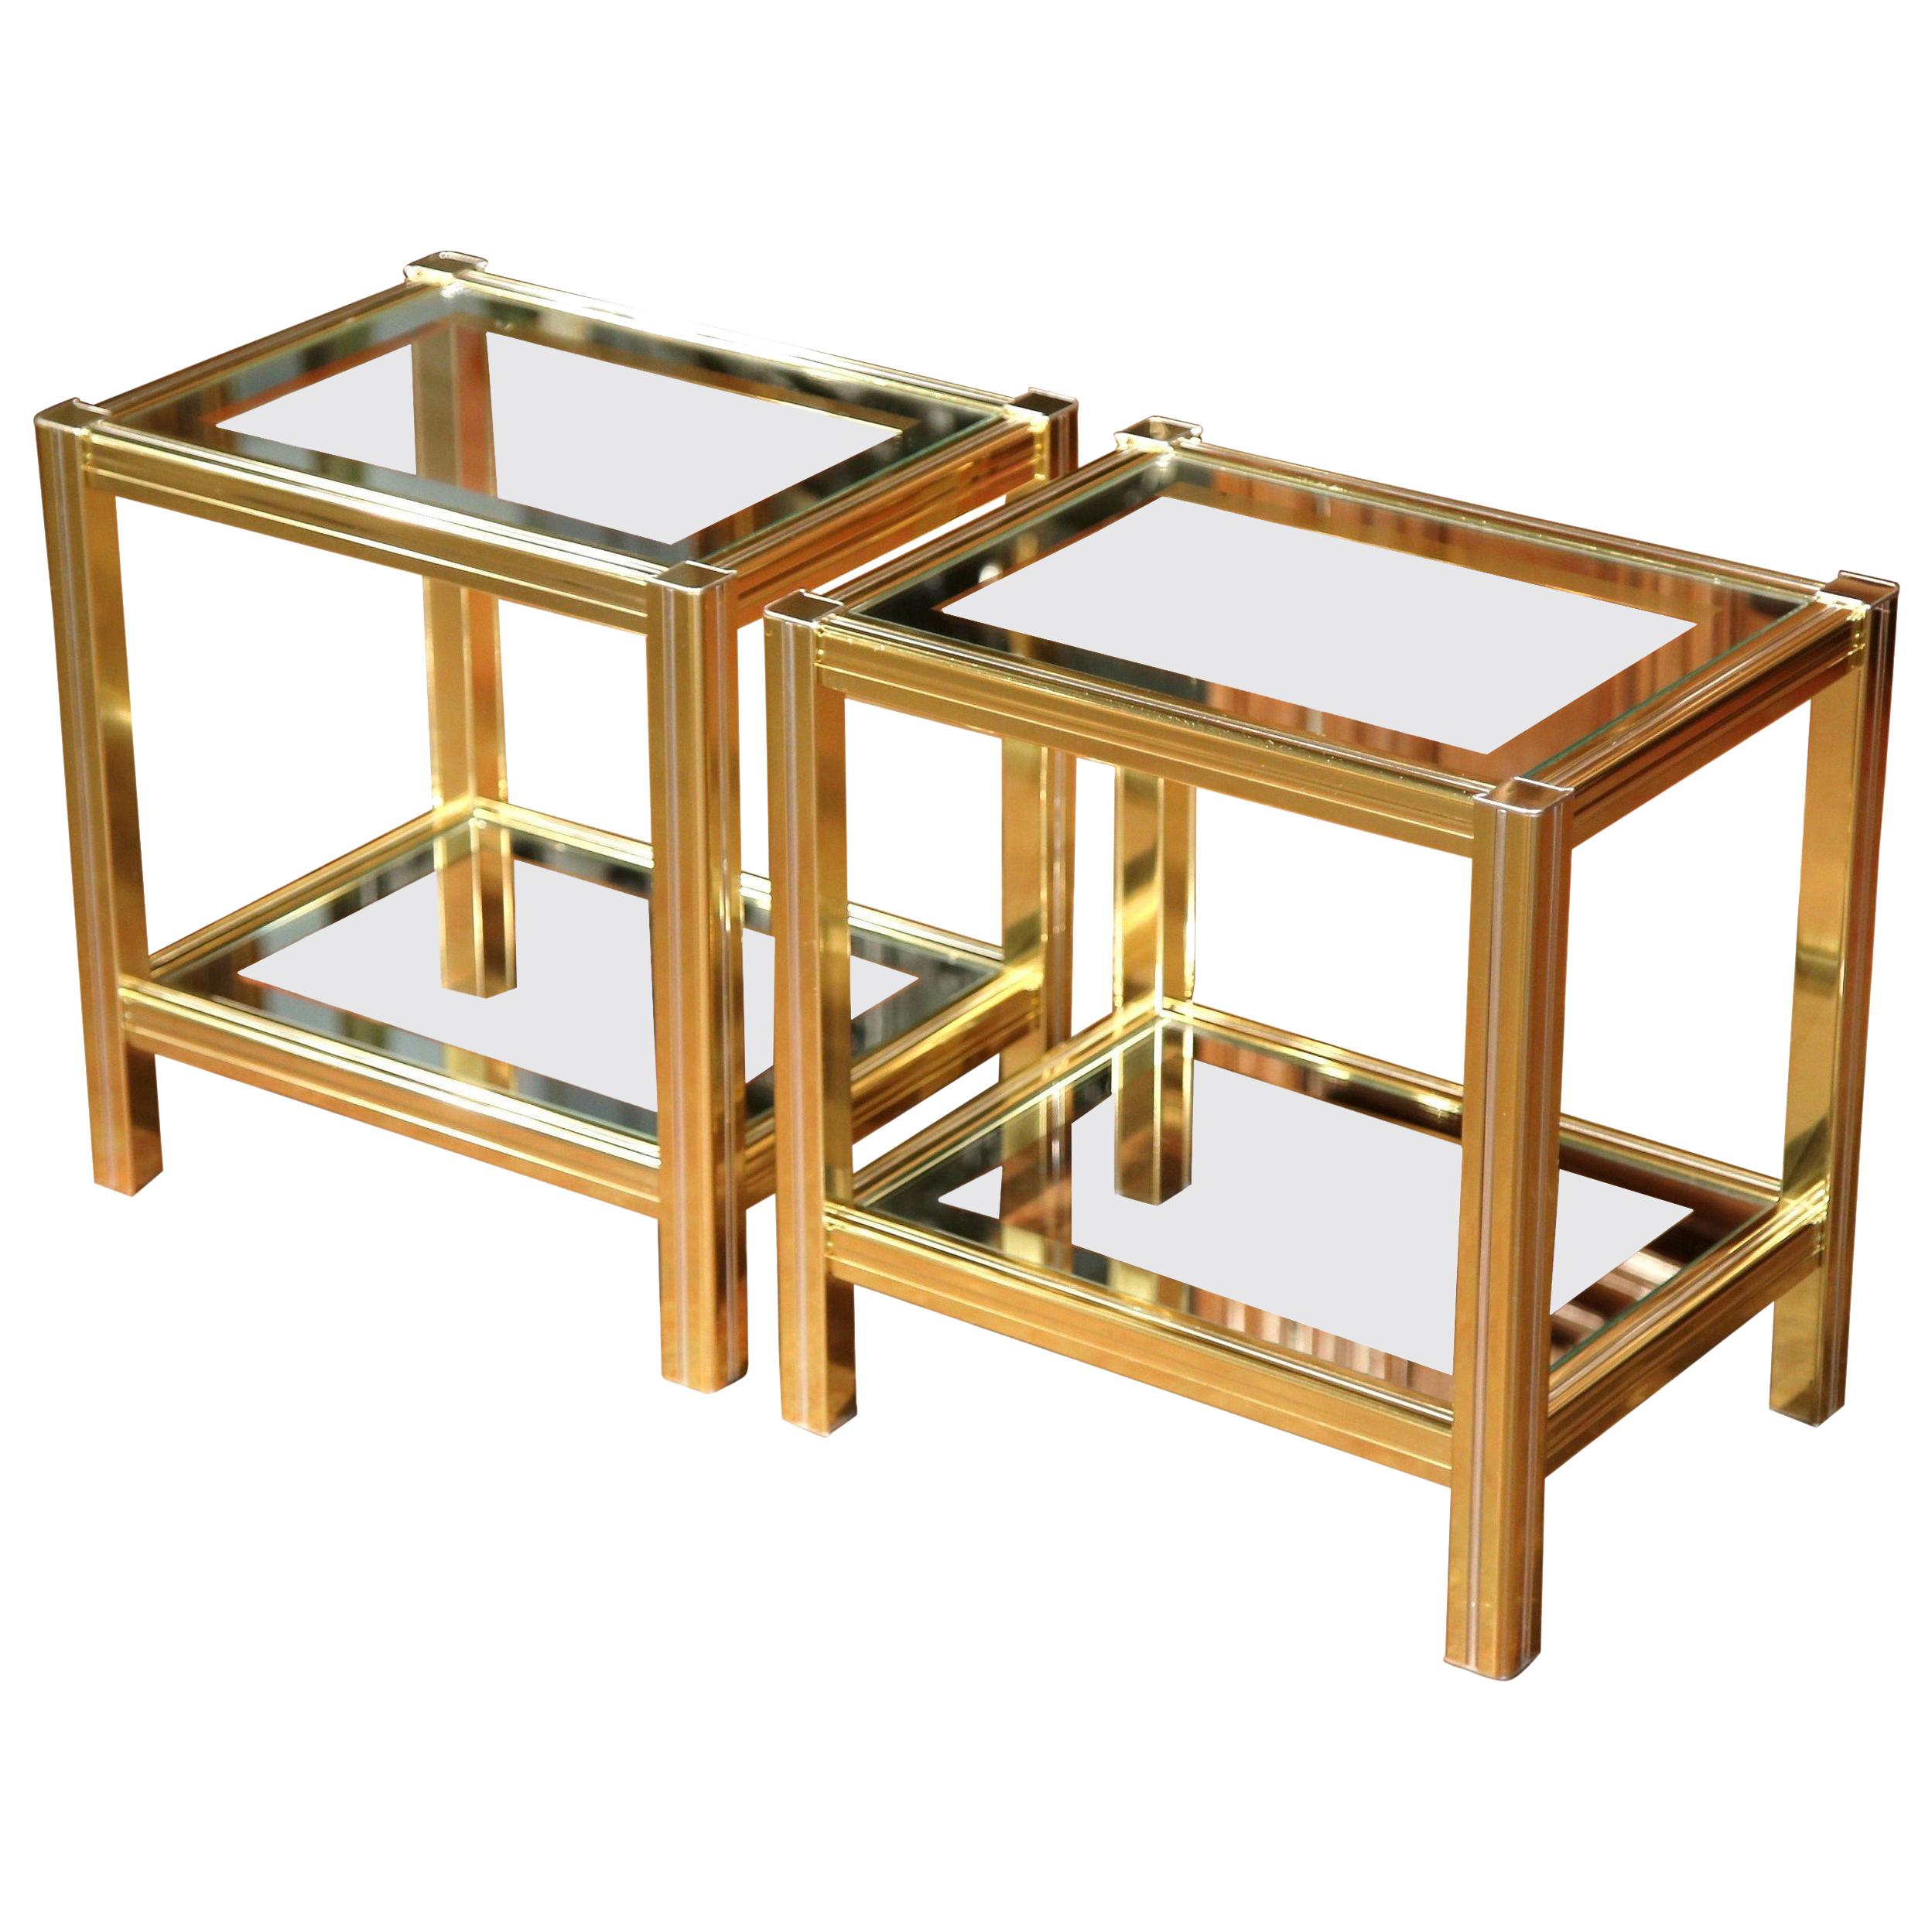 Pair of Mid-20th Century French Neoclassical Gilt Metallic and Glass End Tables